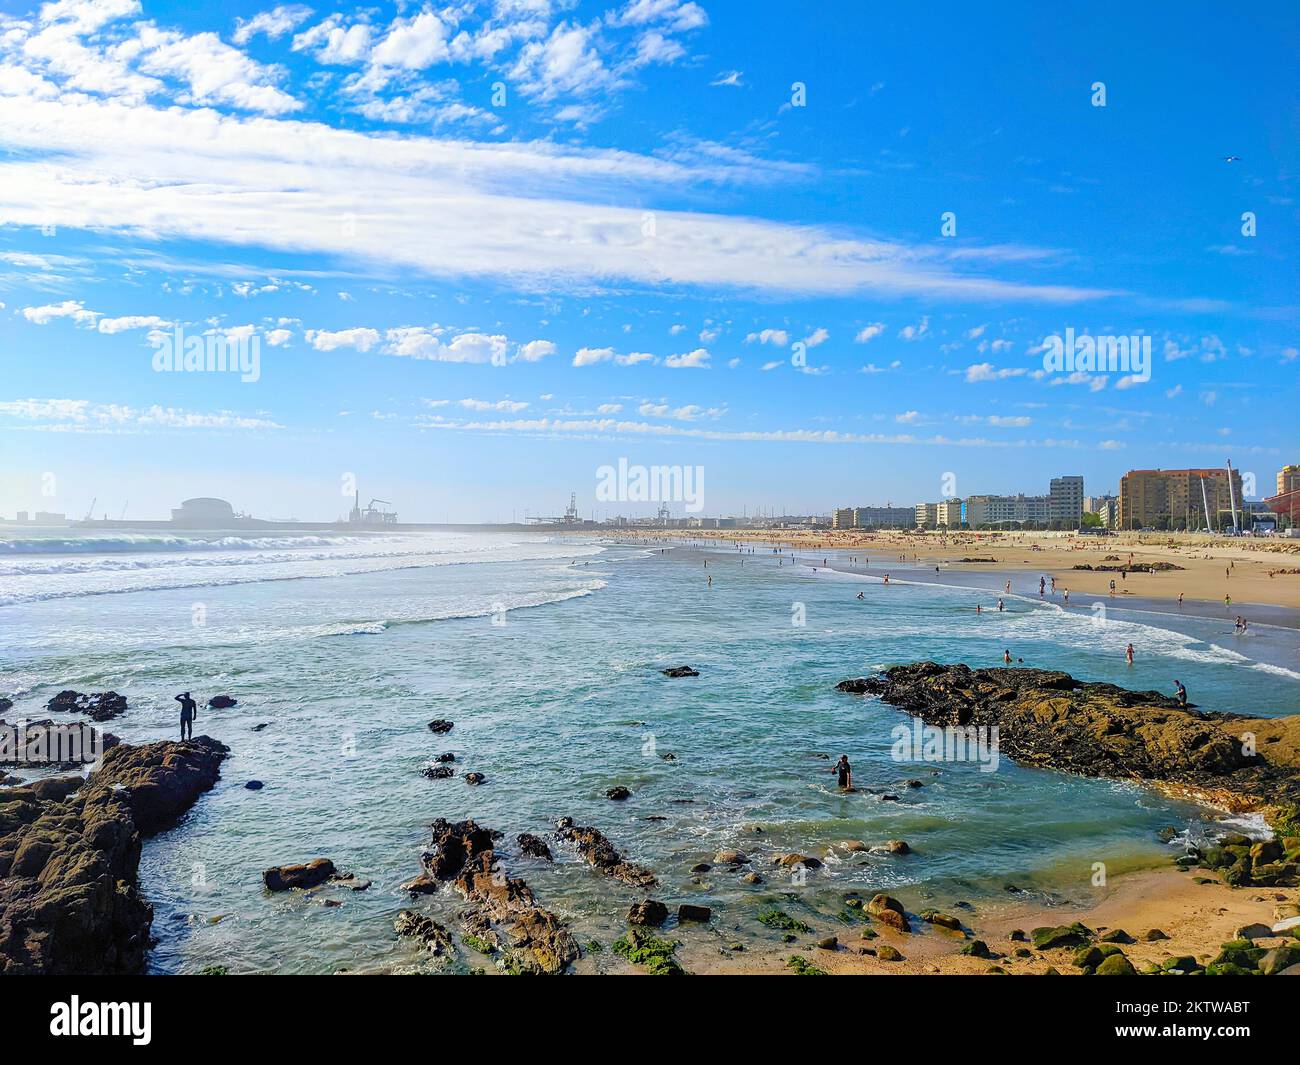 People relaxing at Matosinhos sea beach in sunny day, cityscape with modern architecture and Leixoes port in background, Porto, Portugal Stock Photo